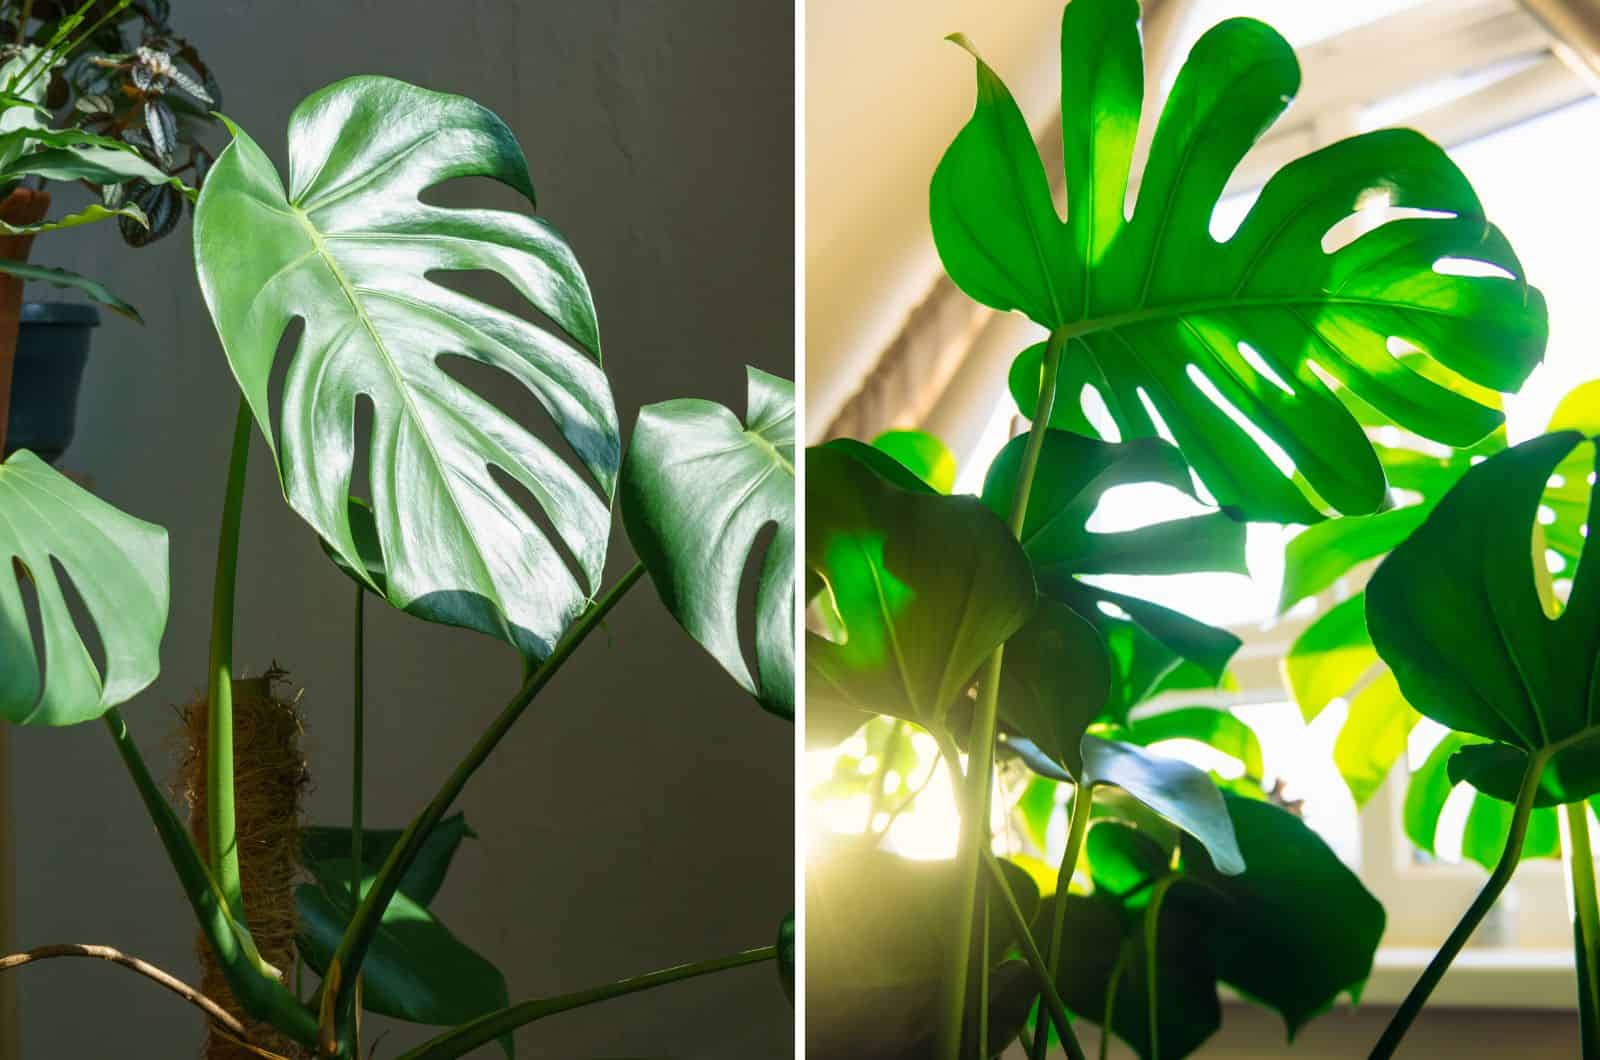 Philodendron and Monstera leaves side by side